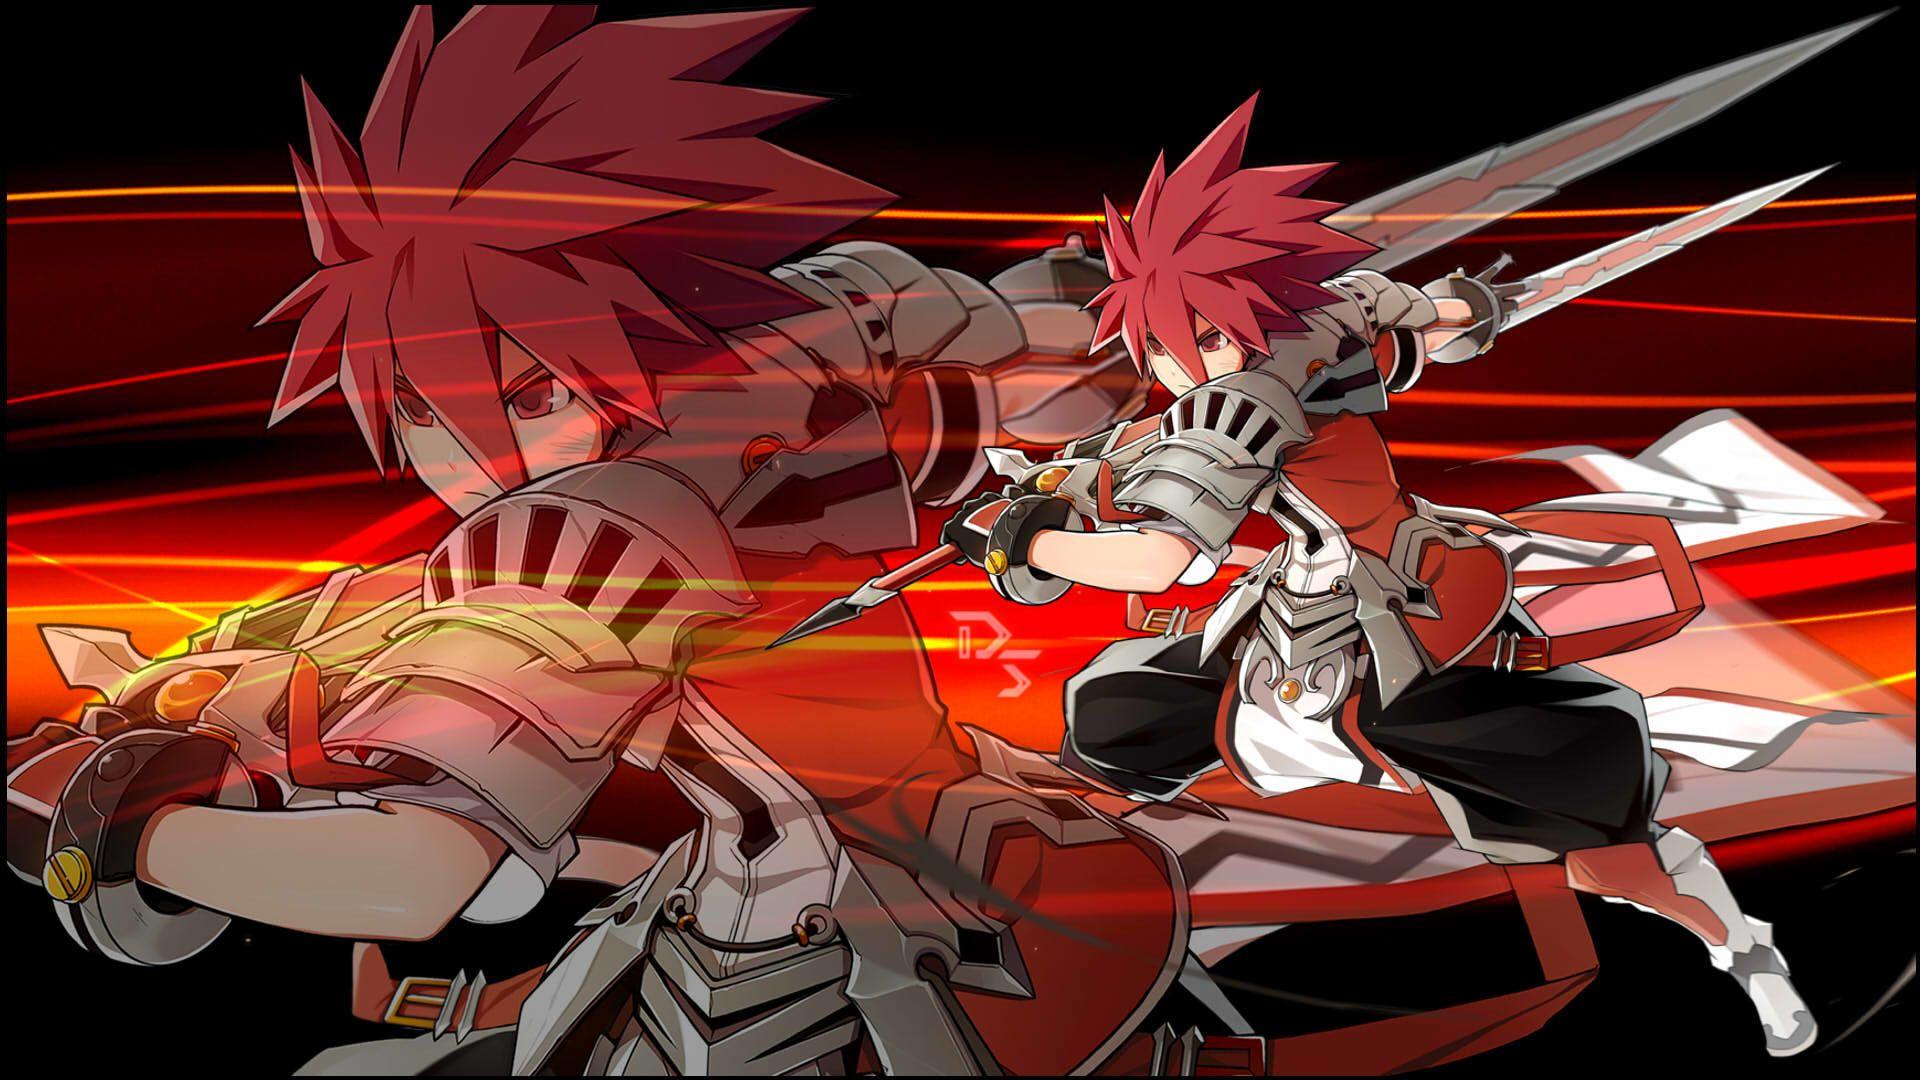 Elsword Lord Knight Wallpapers.